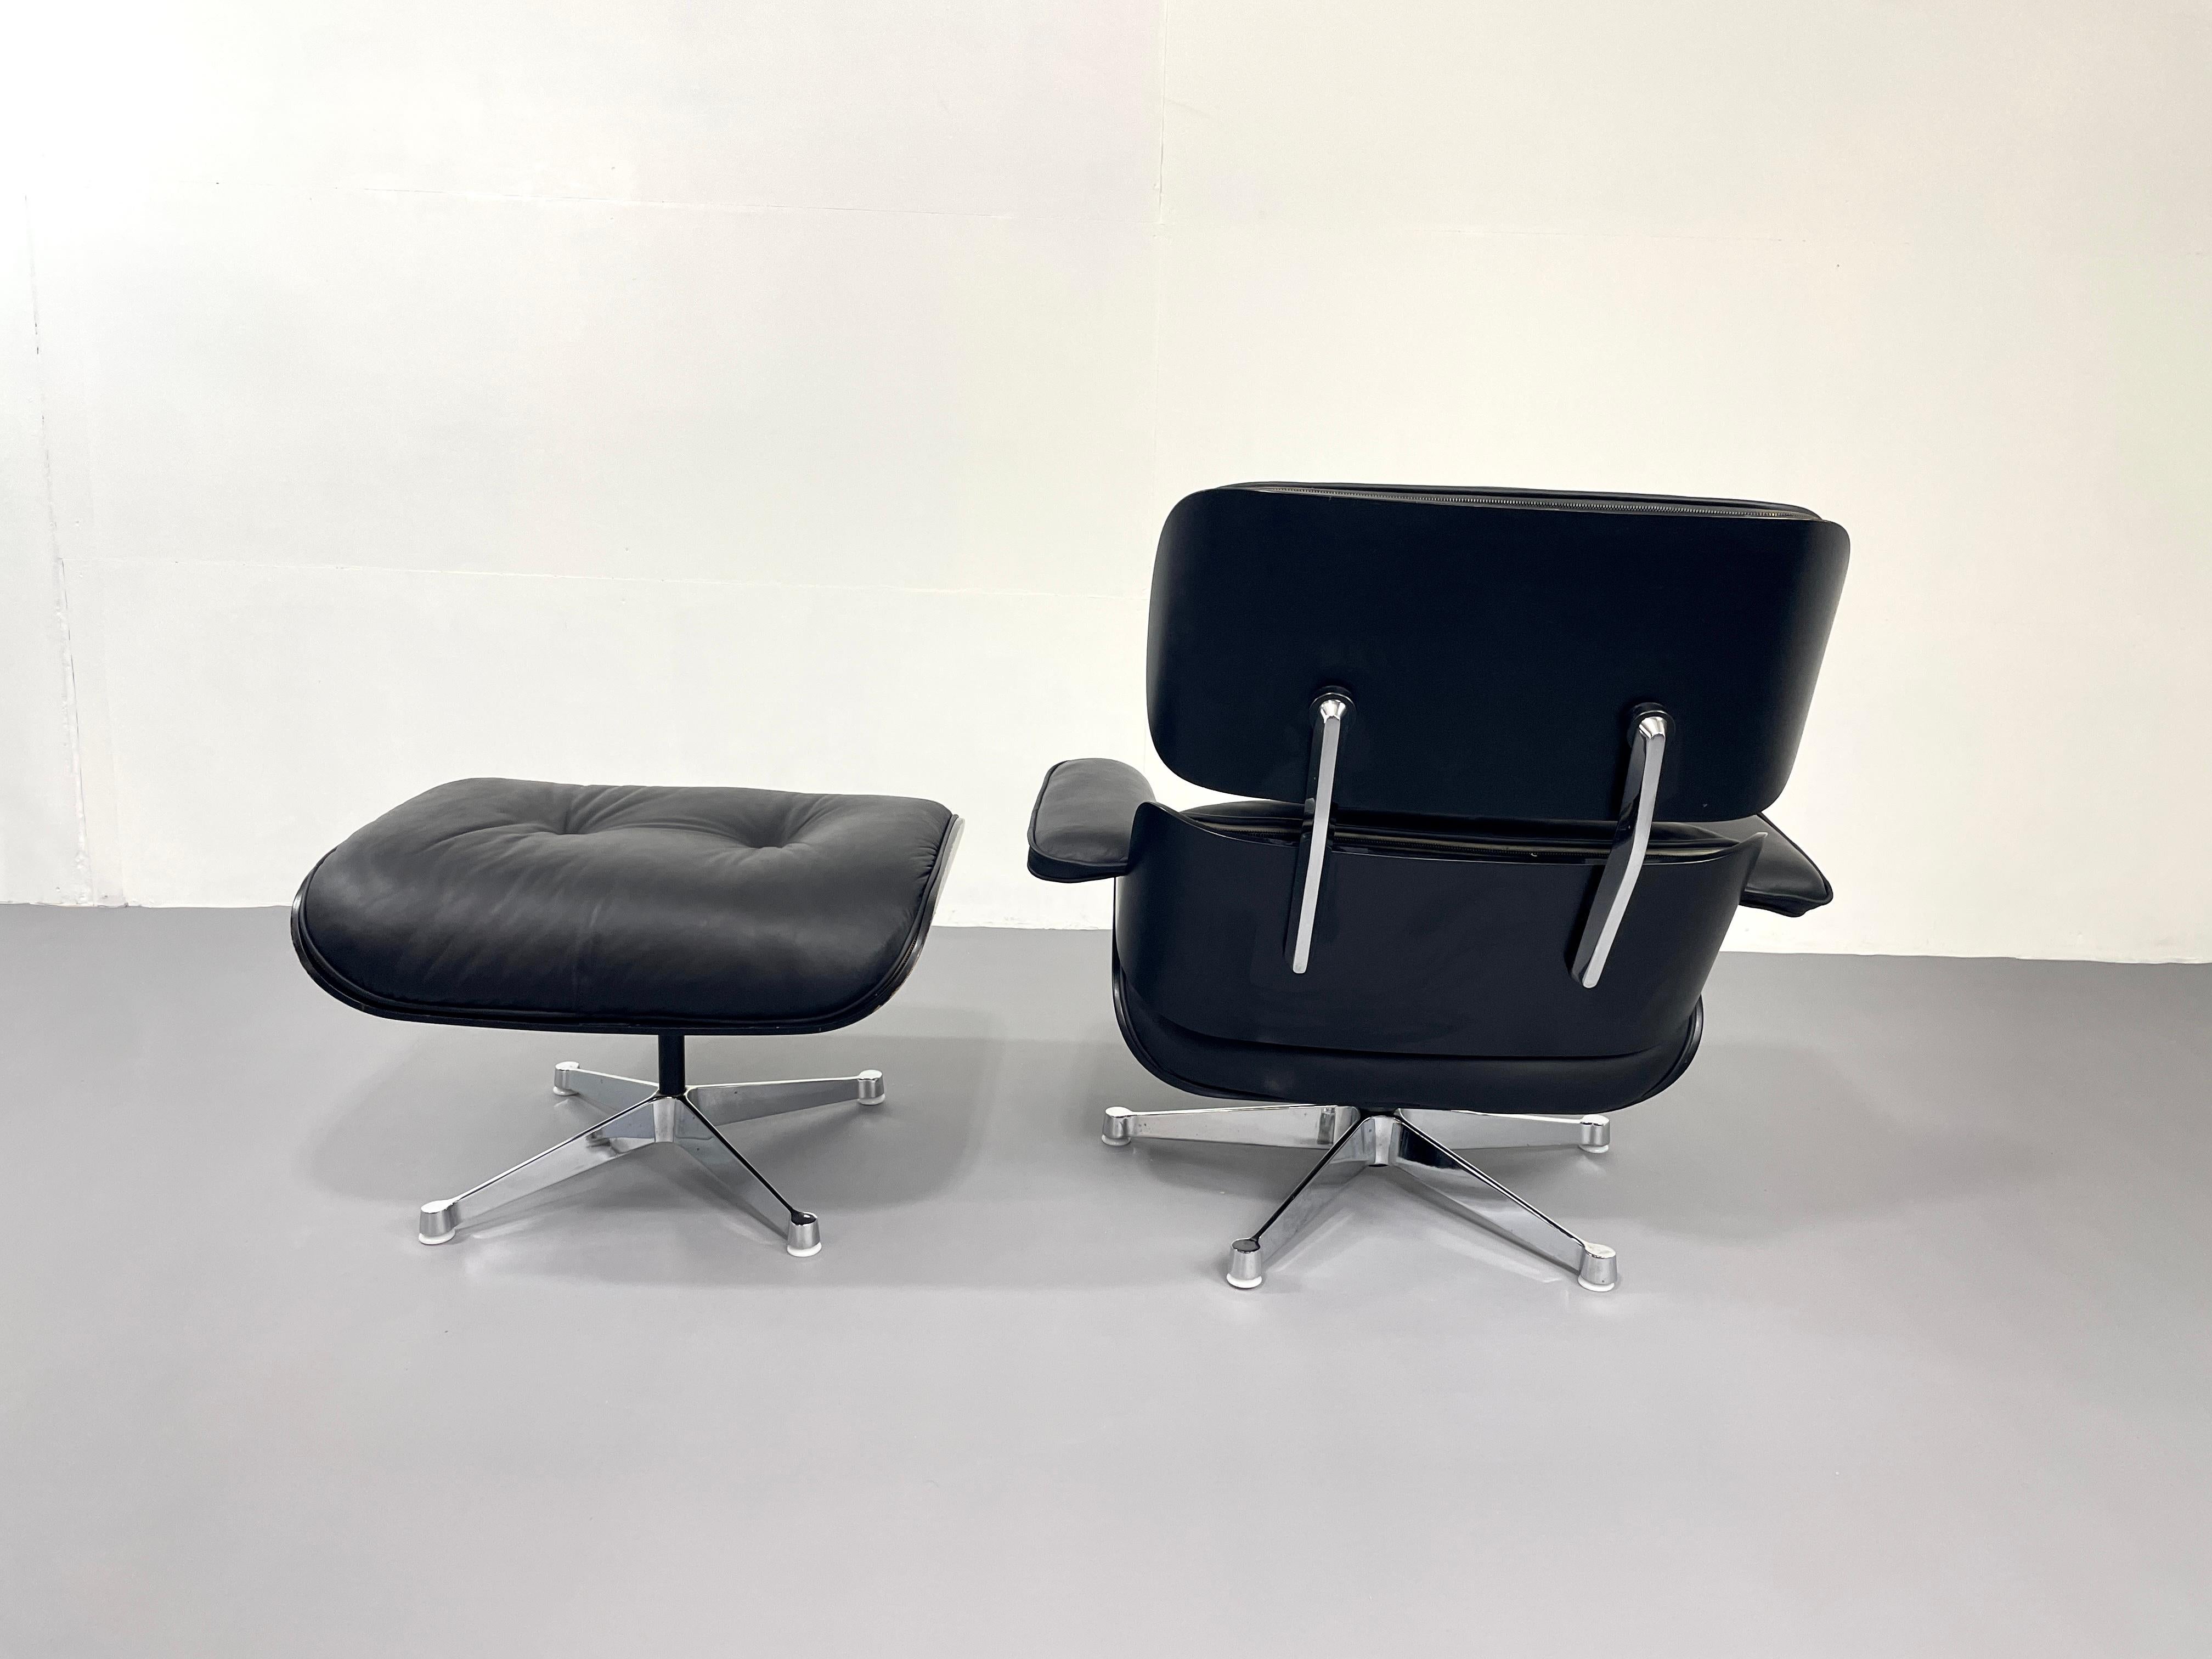 Black vintage Herman Miller Lounge Chair with Ottoman, designed by Eames  For Sale 2